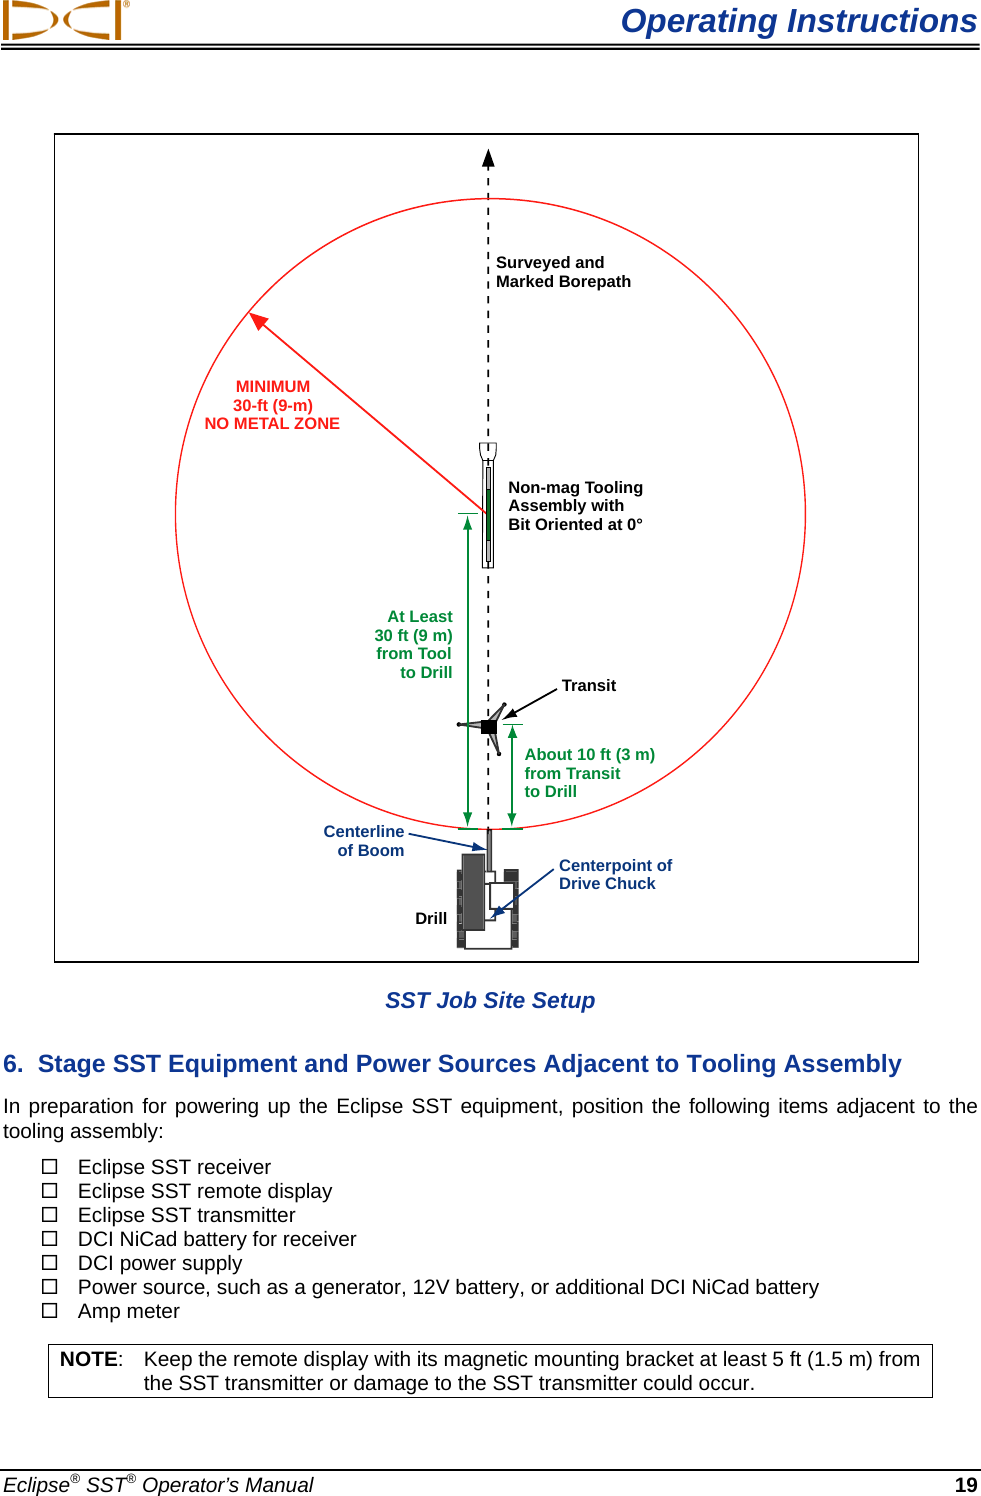  Operating Instructions MINIMUM30-ft (9-m)NO METAL ZONEDrillCenterlineof Boom Centerpoint ofDrive ChuckTransitNon-mag ToolingAssembly withBit Oriented at 0°Surveyed andMarked BorepathAt Least30 ft (9 m)from Toolto DrillAbout 10 ft (3 m)from Transitto Drill  SST Job Site Setup  6.  Stage SST Equipment and Power Sources Adjacent to Tooling Assembly In preparation for powering up the Eclipse SST equipment, position the following items adjacent to the tooling assembly:   Eclipse SST receiver    Eclipse SST remote display   Eclipse SST transmitter   DCI NiCad battery for receiver   DCI power supply   Power source, such as a generator, 12V battery, or additional DCI NiCad battery    Amp meter  NOTE:  Keep the remote display with its magnetic mounting bracket at least 5 ft (1.5 m) from the SST transmitter or damage to the SST transmitter could occur. Eclipse® SST® Operator’s Manual  19 